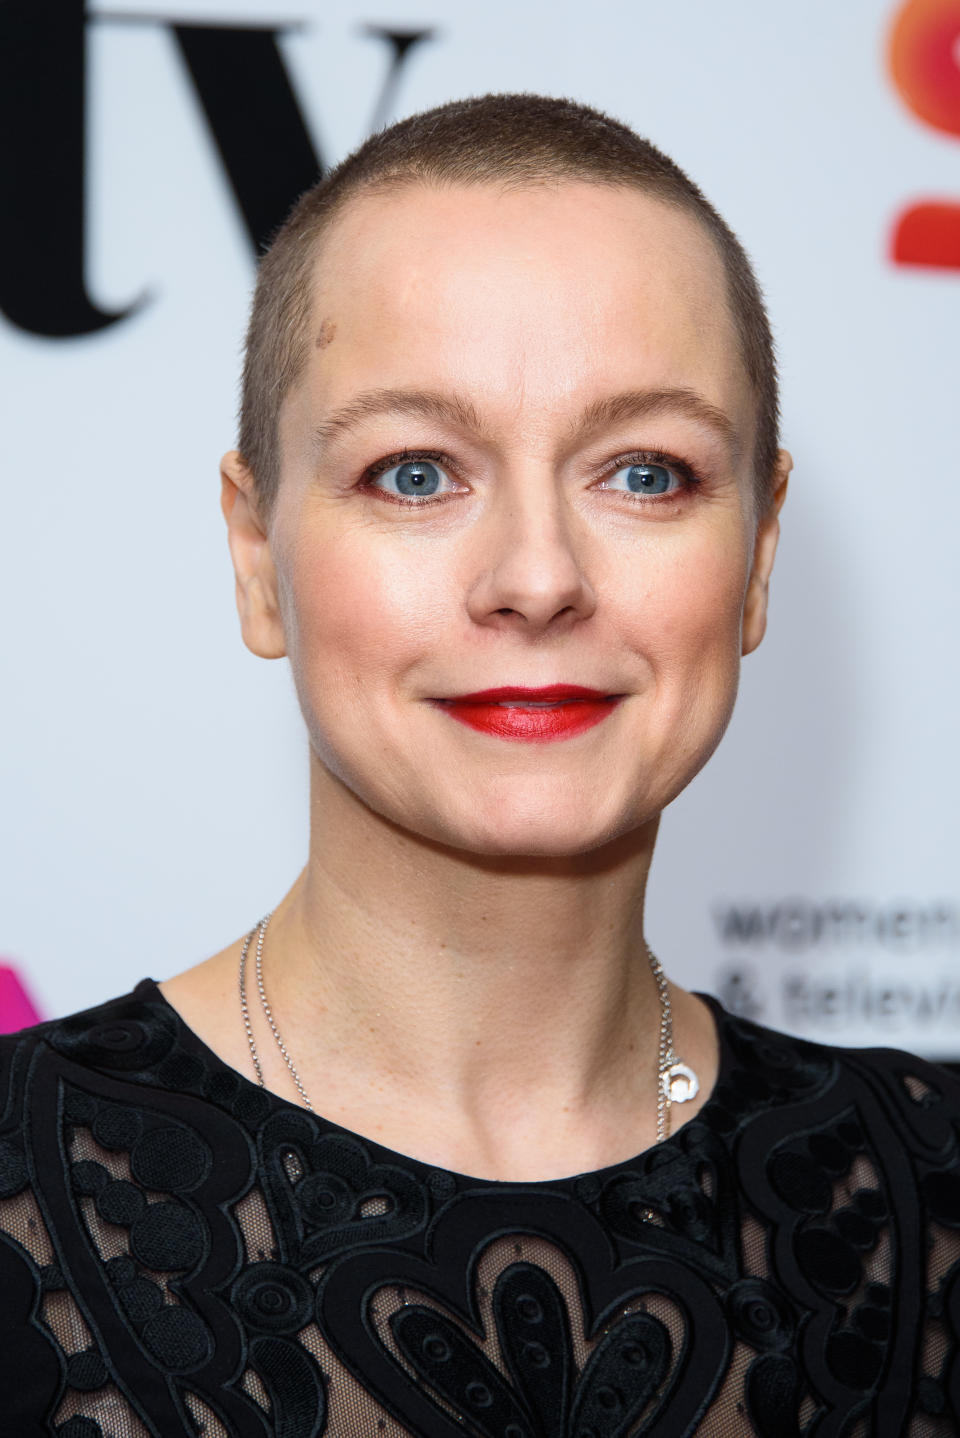 Samantha Morton during Women in Film & TV Awards 2019 at Hilton Park Lane on December 06, 2019 in London, England. (Photo by Joe Maher/Getty Images)